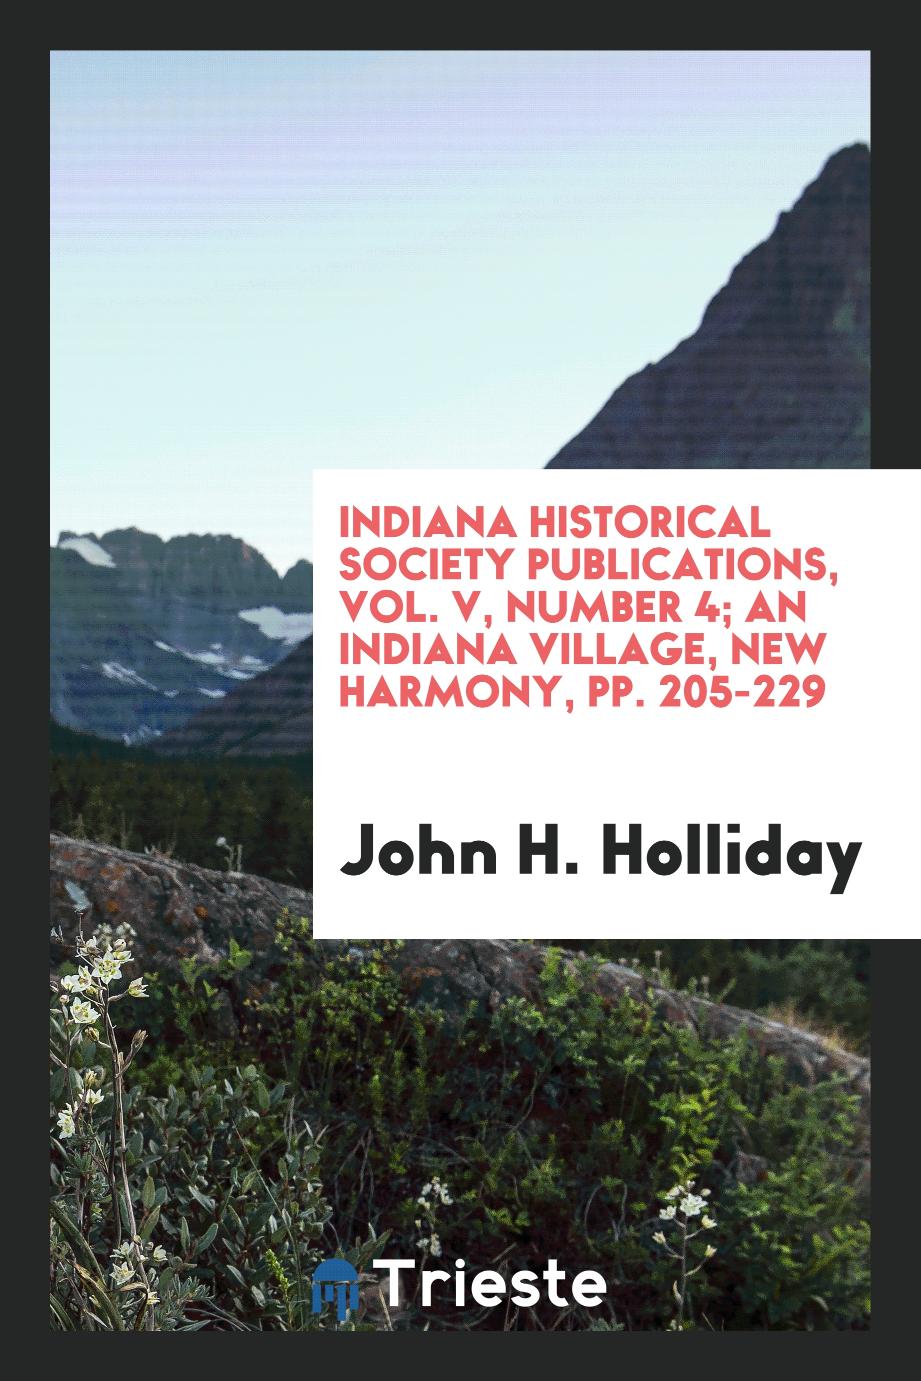 Indiana Historical Society Publications, Vol. V, Number 4; An Indiana Village, New Harmony, pp. 205-229